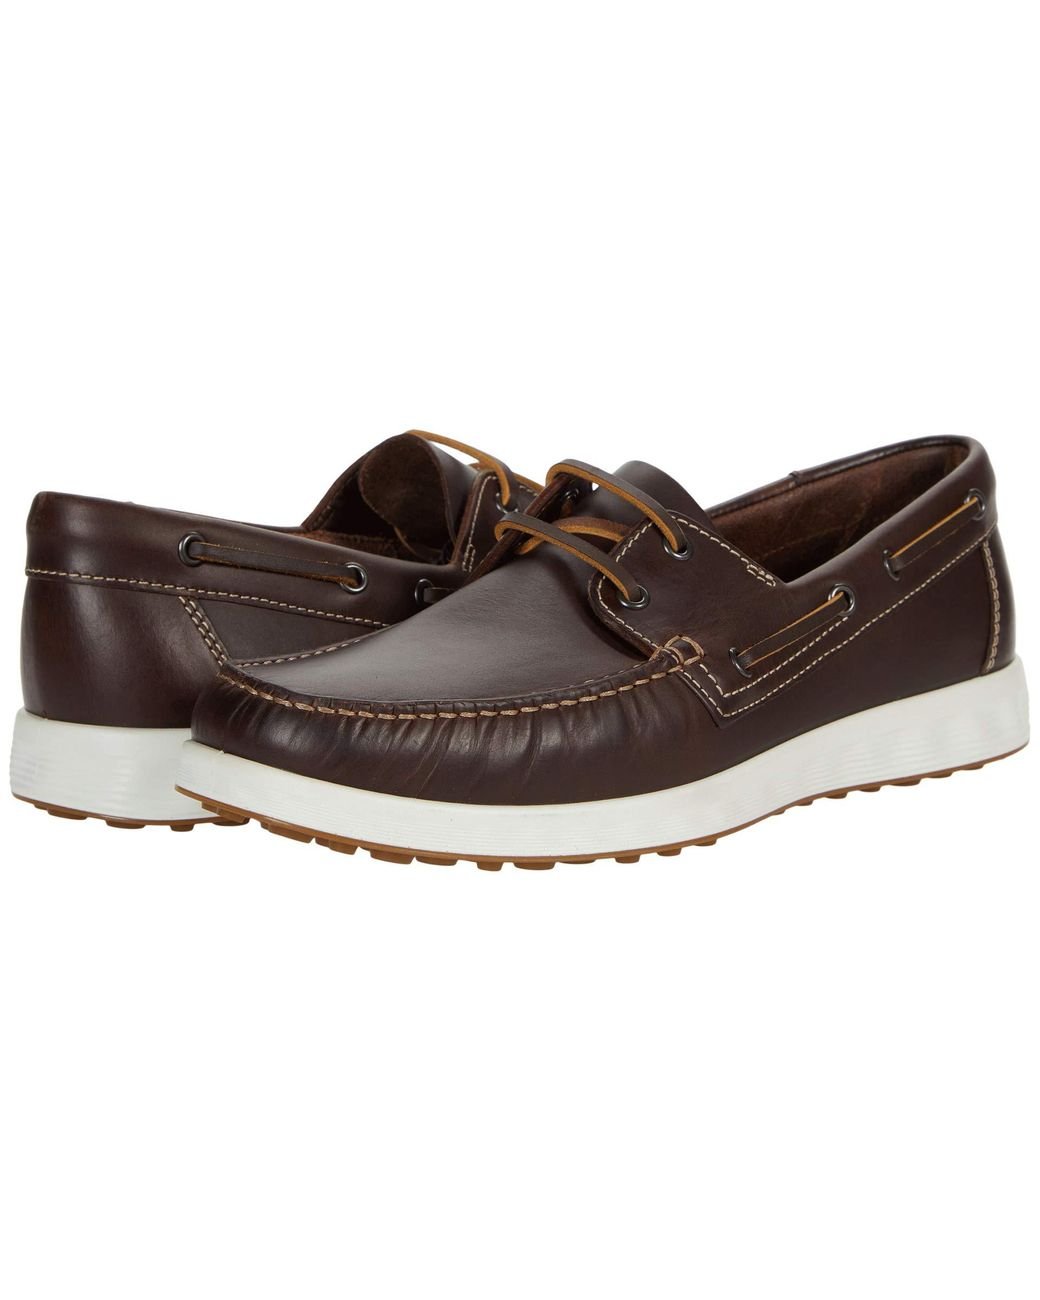 Ecco Leather S Lite Moc Boat Shoe Shoes in Brown for Men - Lyst